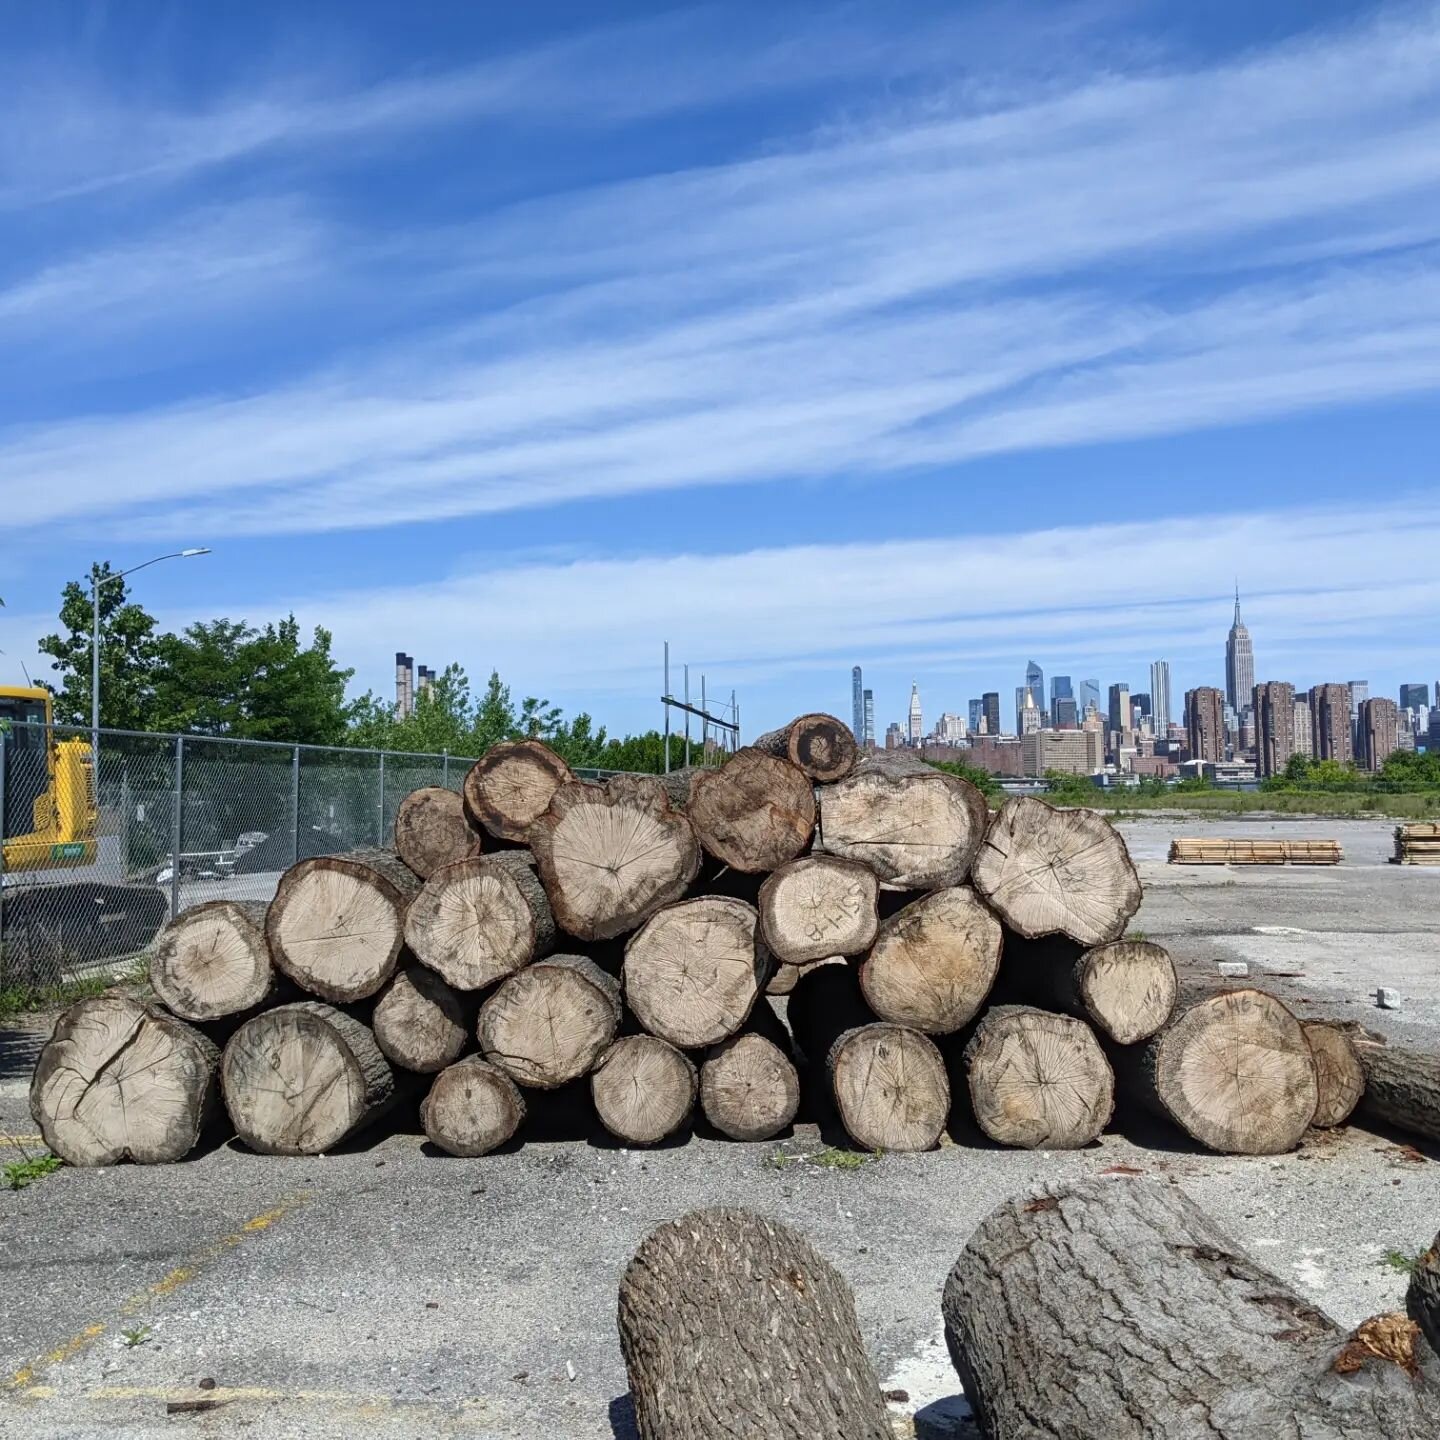 Nice to see urban forestry and sustainable wood products go hand in hand, I'm all for the circular economy!  Cool pilot program between @nycparks and @triloxworkshop - thanks for a close-up view!